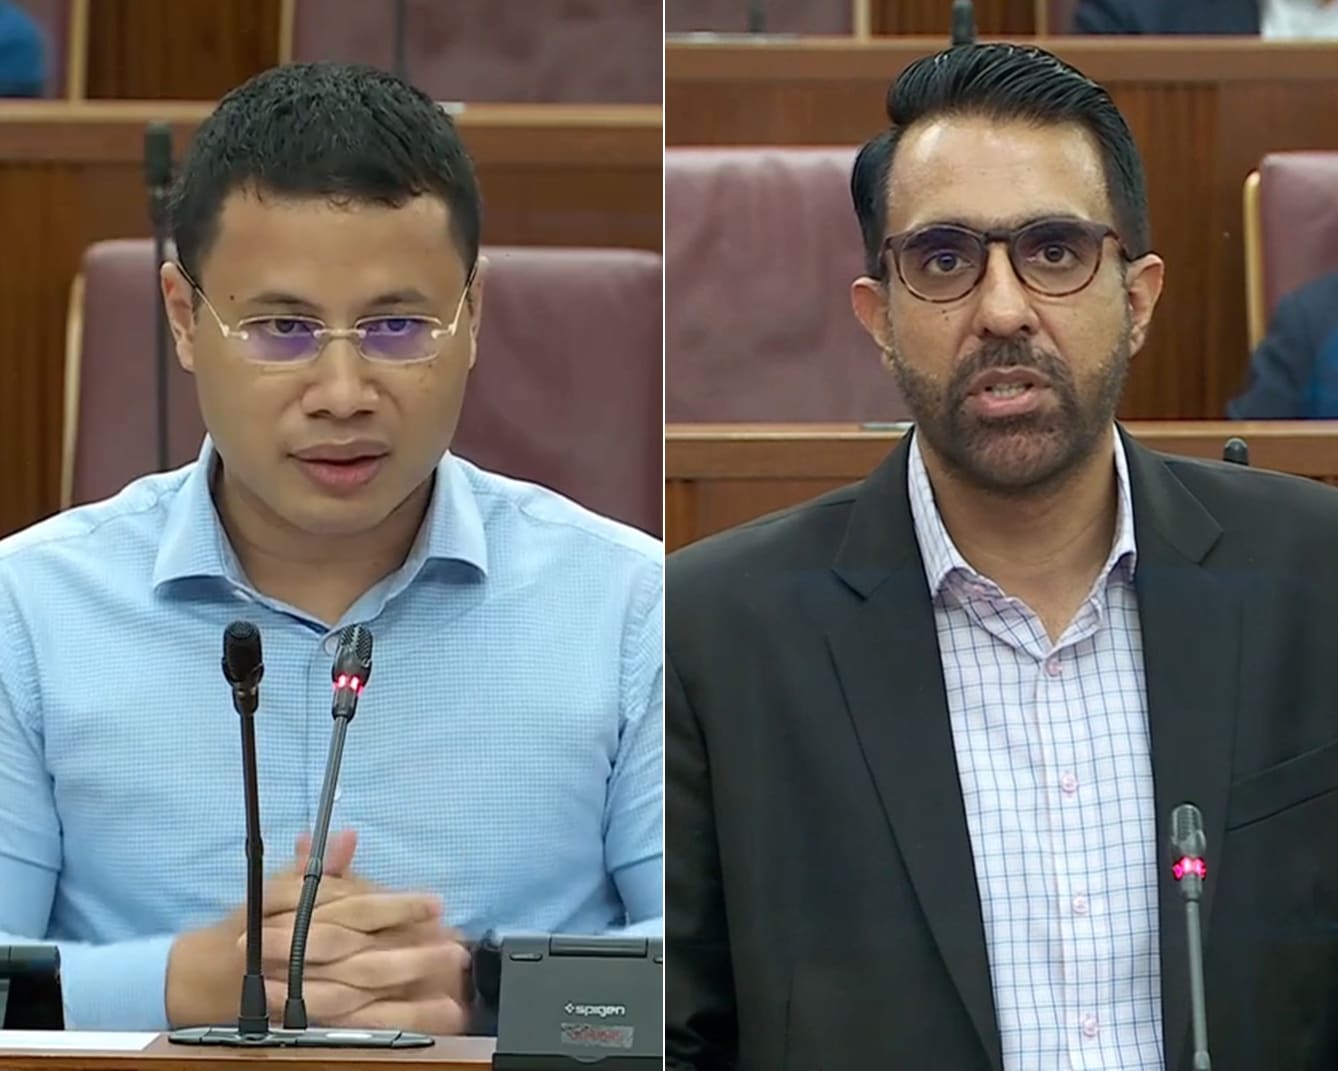 National Development Minister Desmond Lee (left) and Workers' Party chief Pritam Singh (right) in Parliament on Feb 15, 2022.